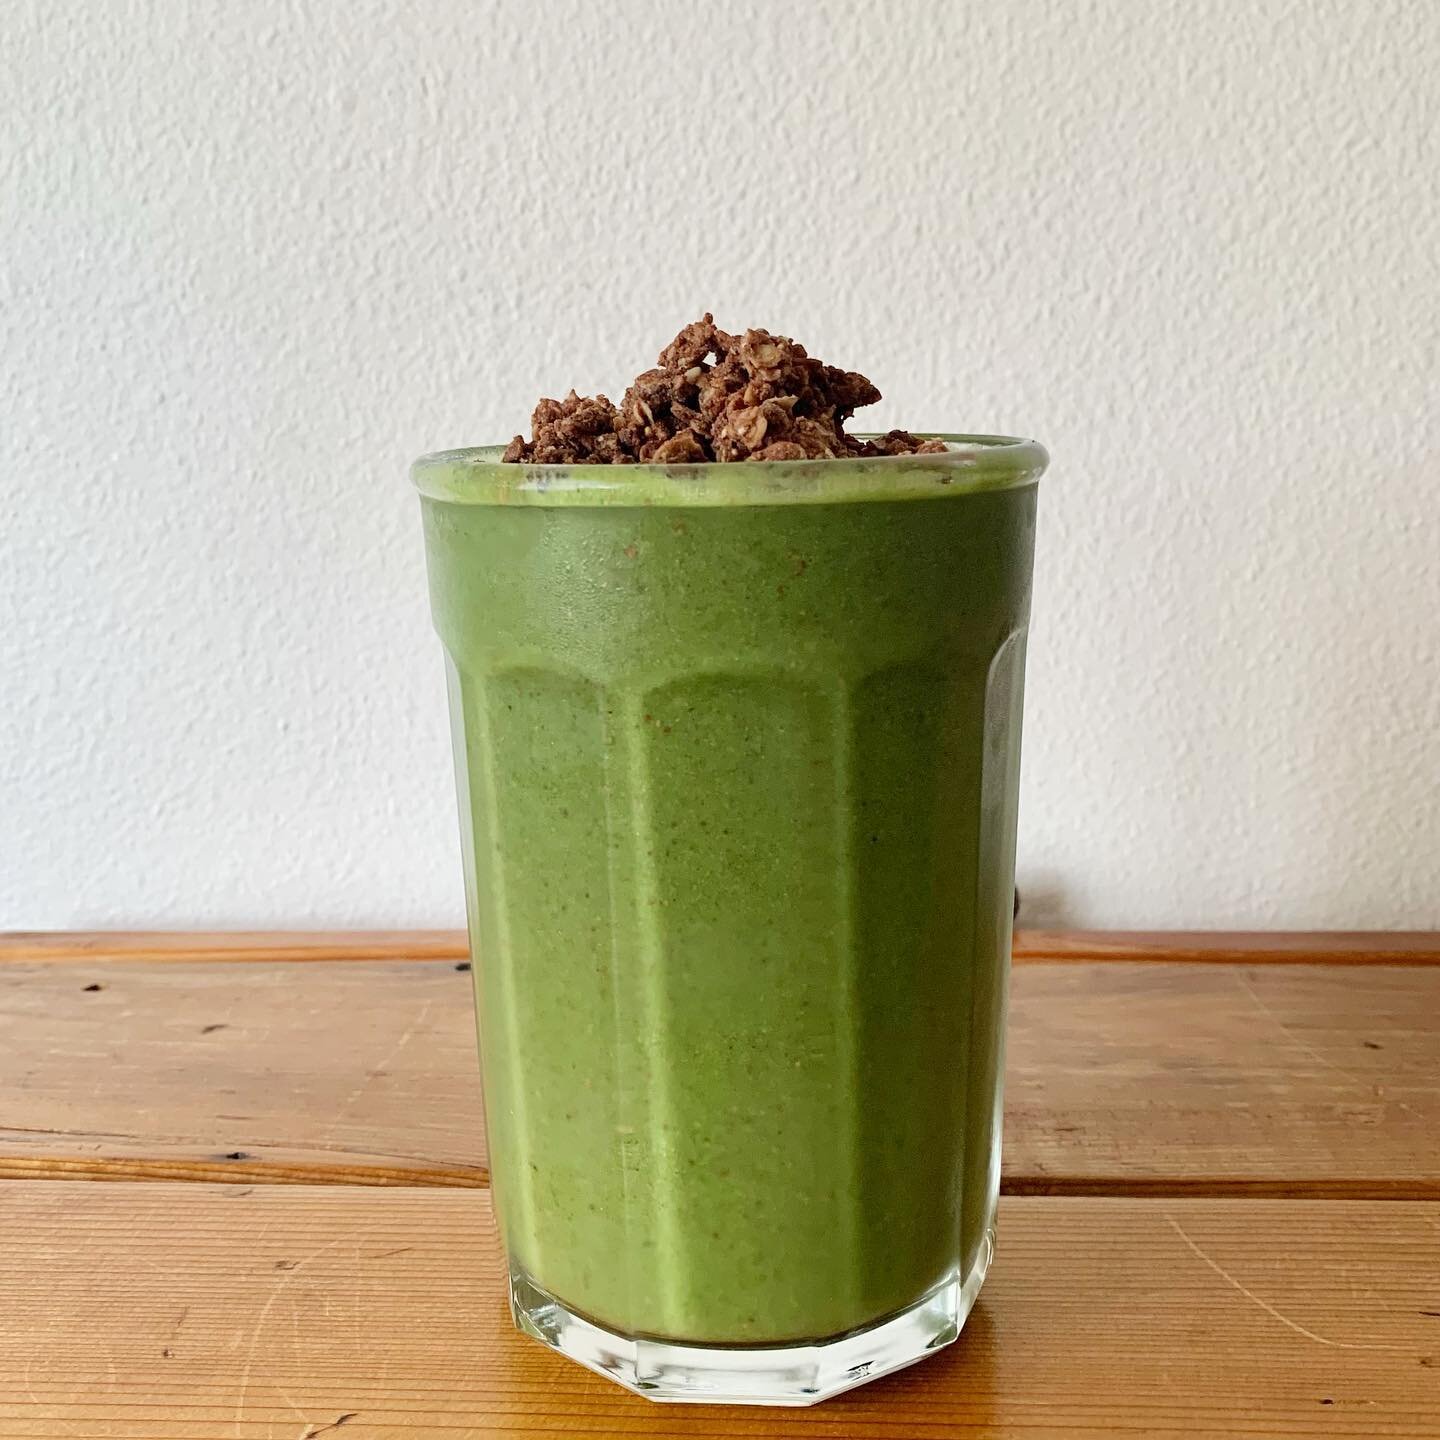 OKAY &mdash; This digestion supportive Chocolate mint smoothie is what your life has been missing!
⠀
Inspired by my fave local smoothie joint @fitbarcafe 
⠀
The dEATS:
&bull; Coconut water
&bull; Vanilla digestion support protein @nuzest_usa @lilsipp